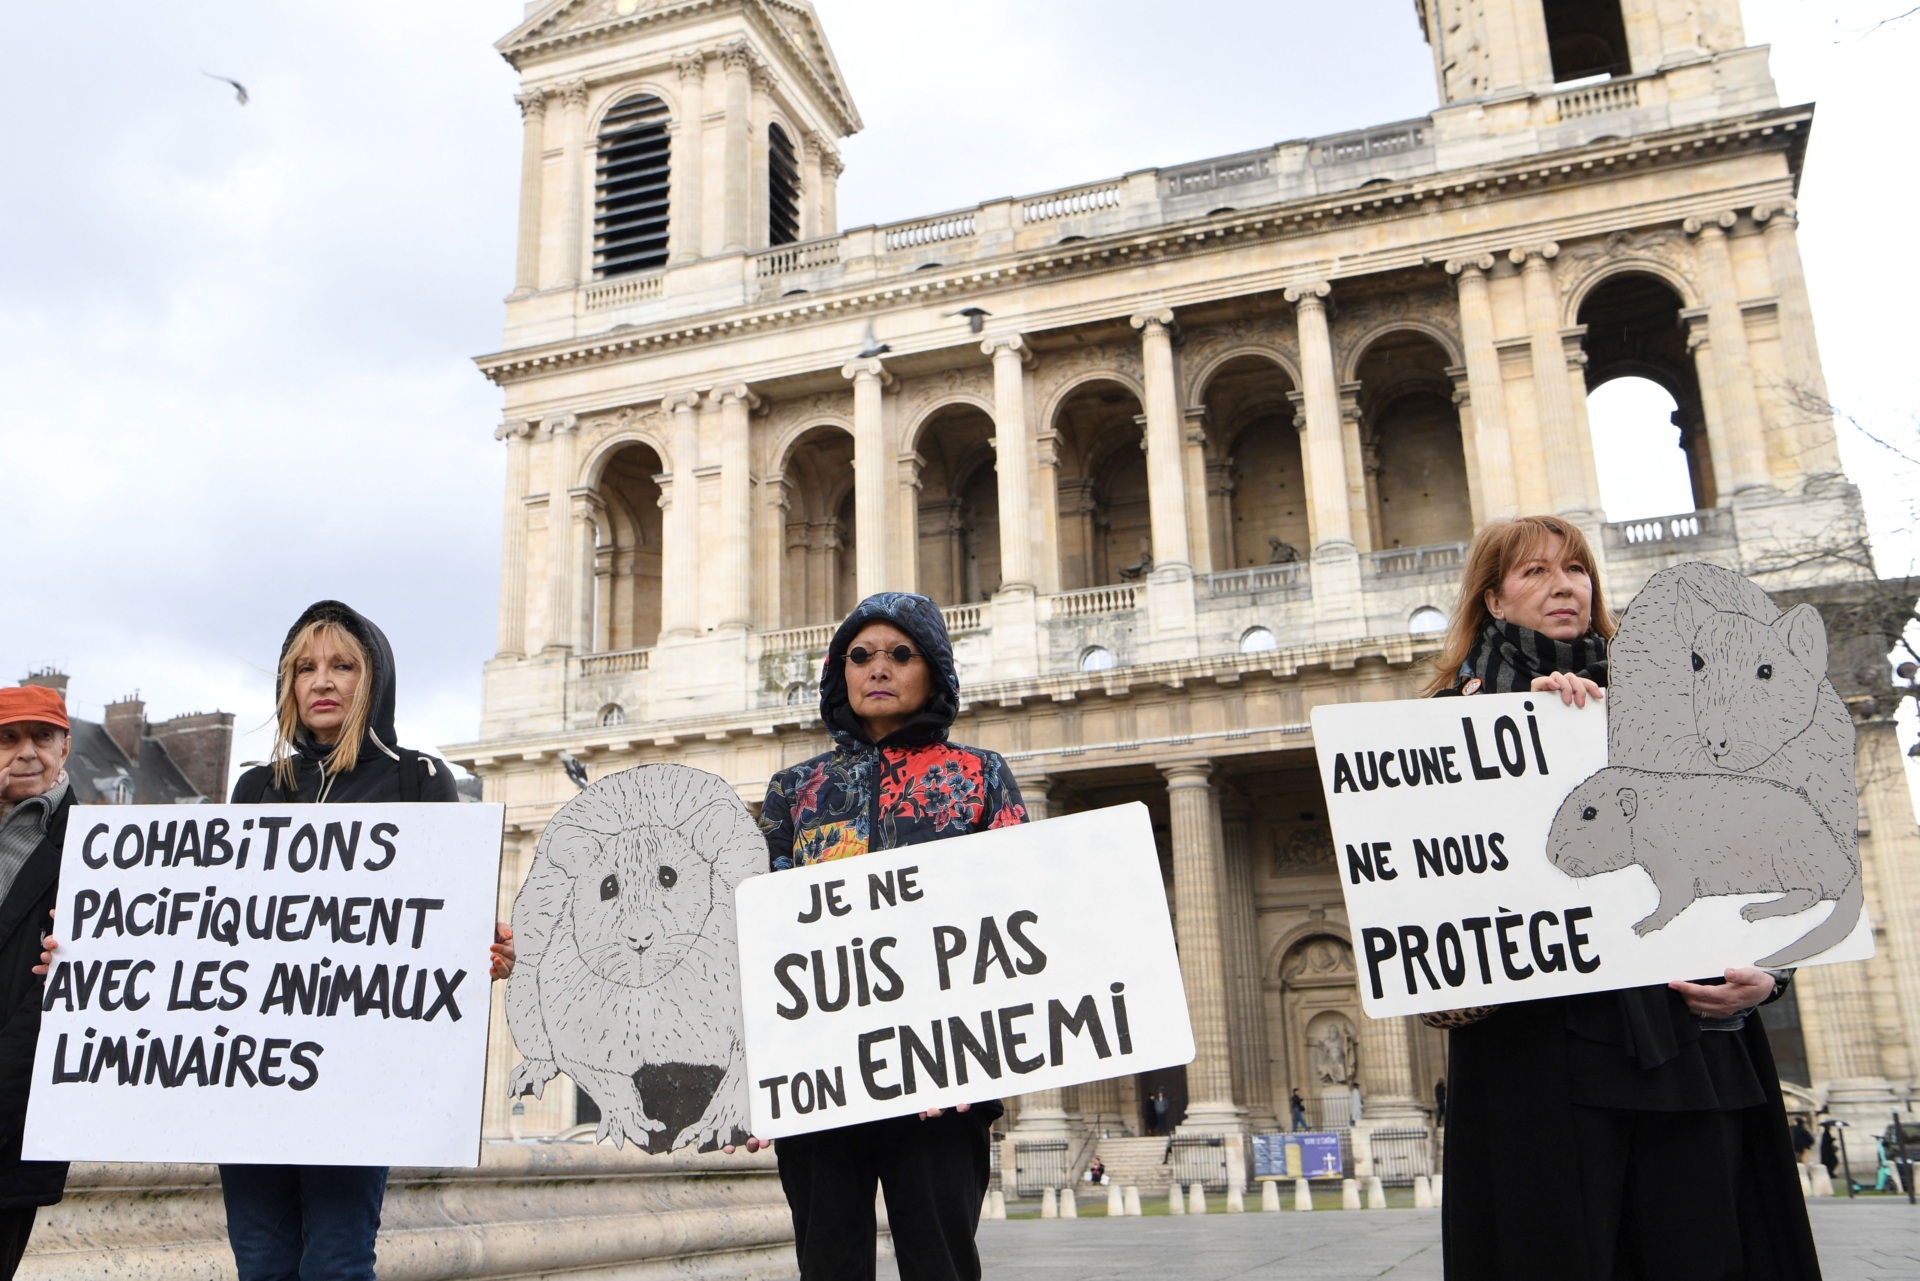 Members of the Paris Animo Zoo (PAZ) Association hold a placard at a rally calling for the protection of small animals (rats, pigeons) in Paris on March 18, 2023.  (Photo credit: Bertrand GUAY/AFP)/AFP via Getty Images)